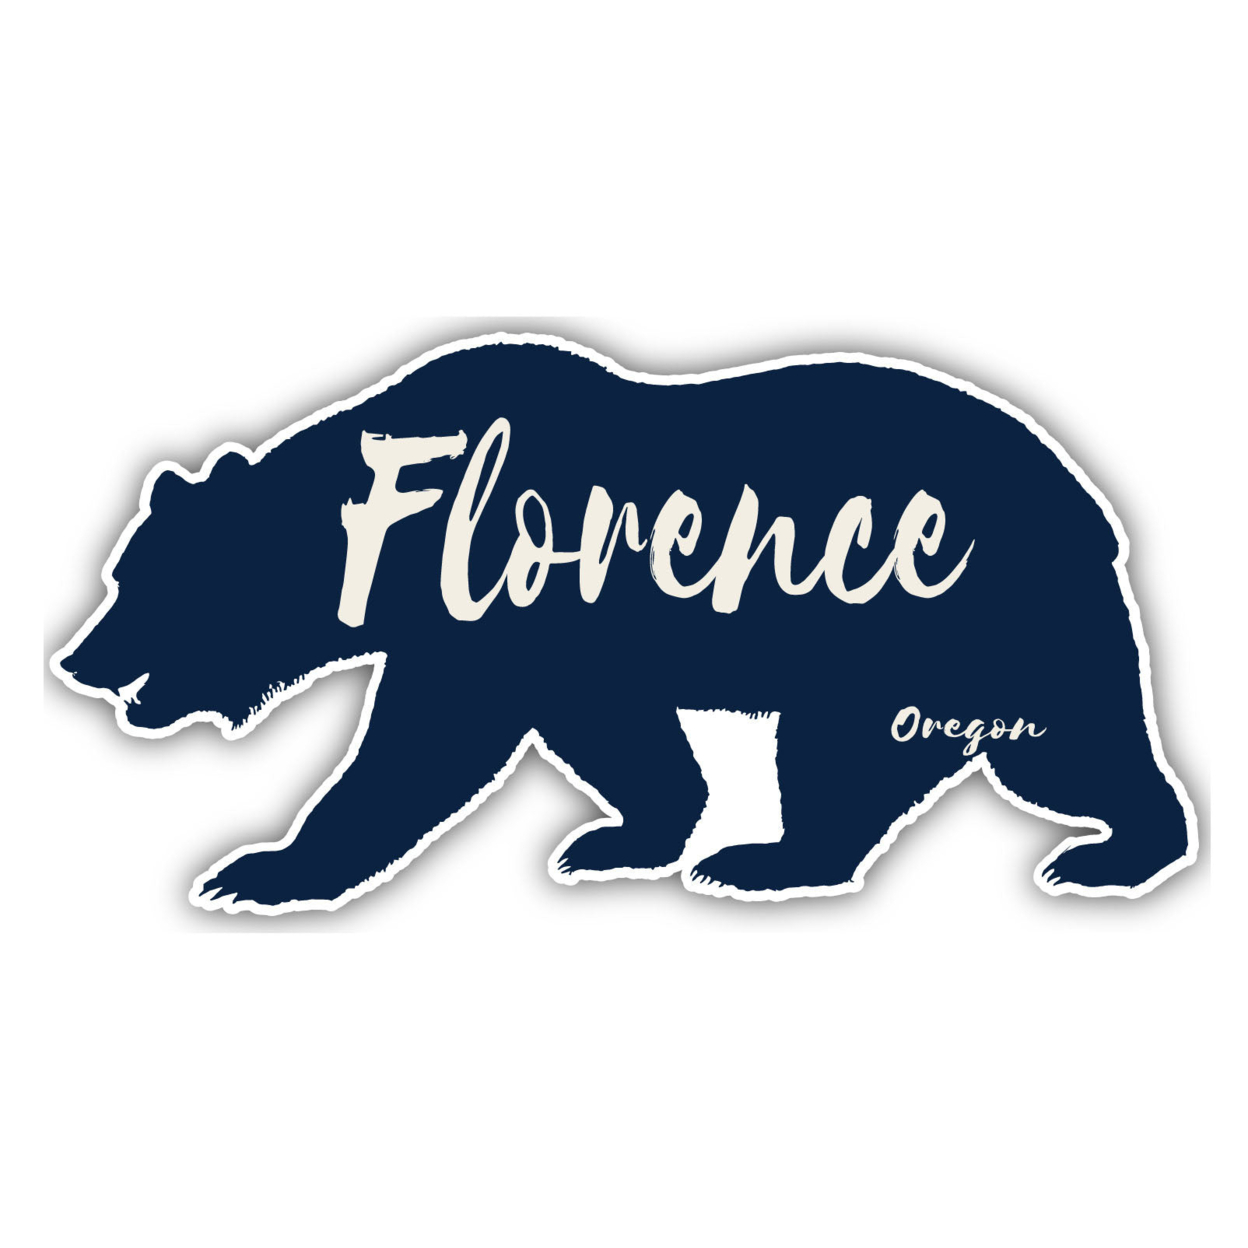 Florence Oregon Souvenir Decorative Stickers (Choose Theme And Size) - 4-Pack, 2-Inch, Bear